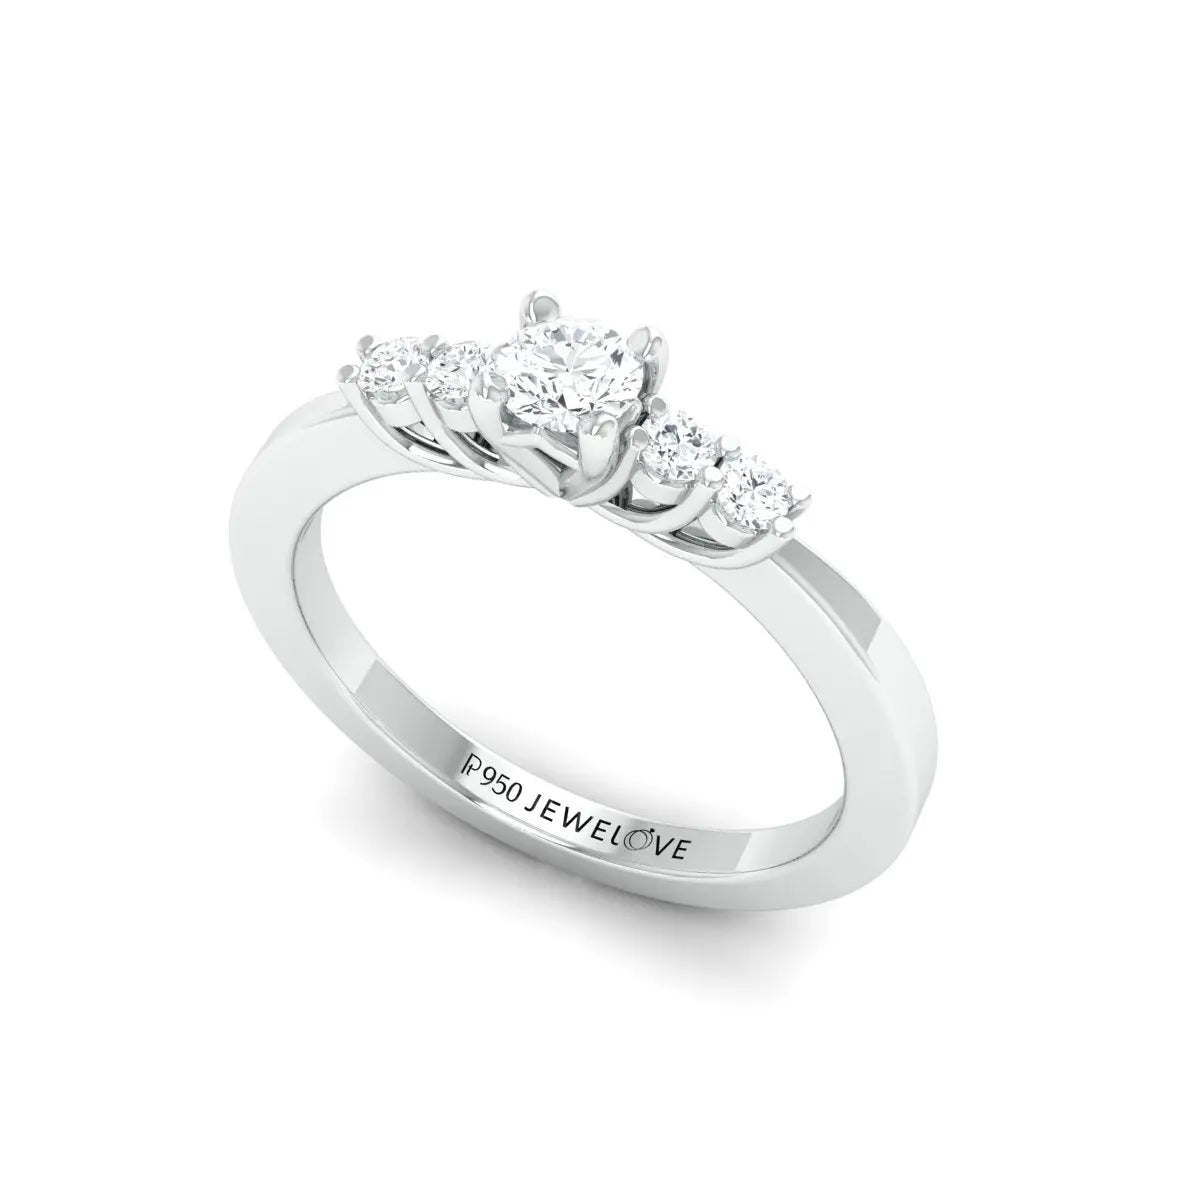 30 Pointer Solitaire Platinum Ring with Diamond Accents for Women JL PT 323   Jewelove